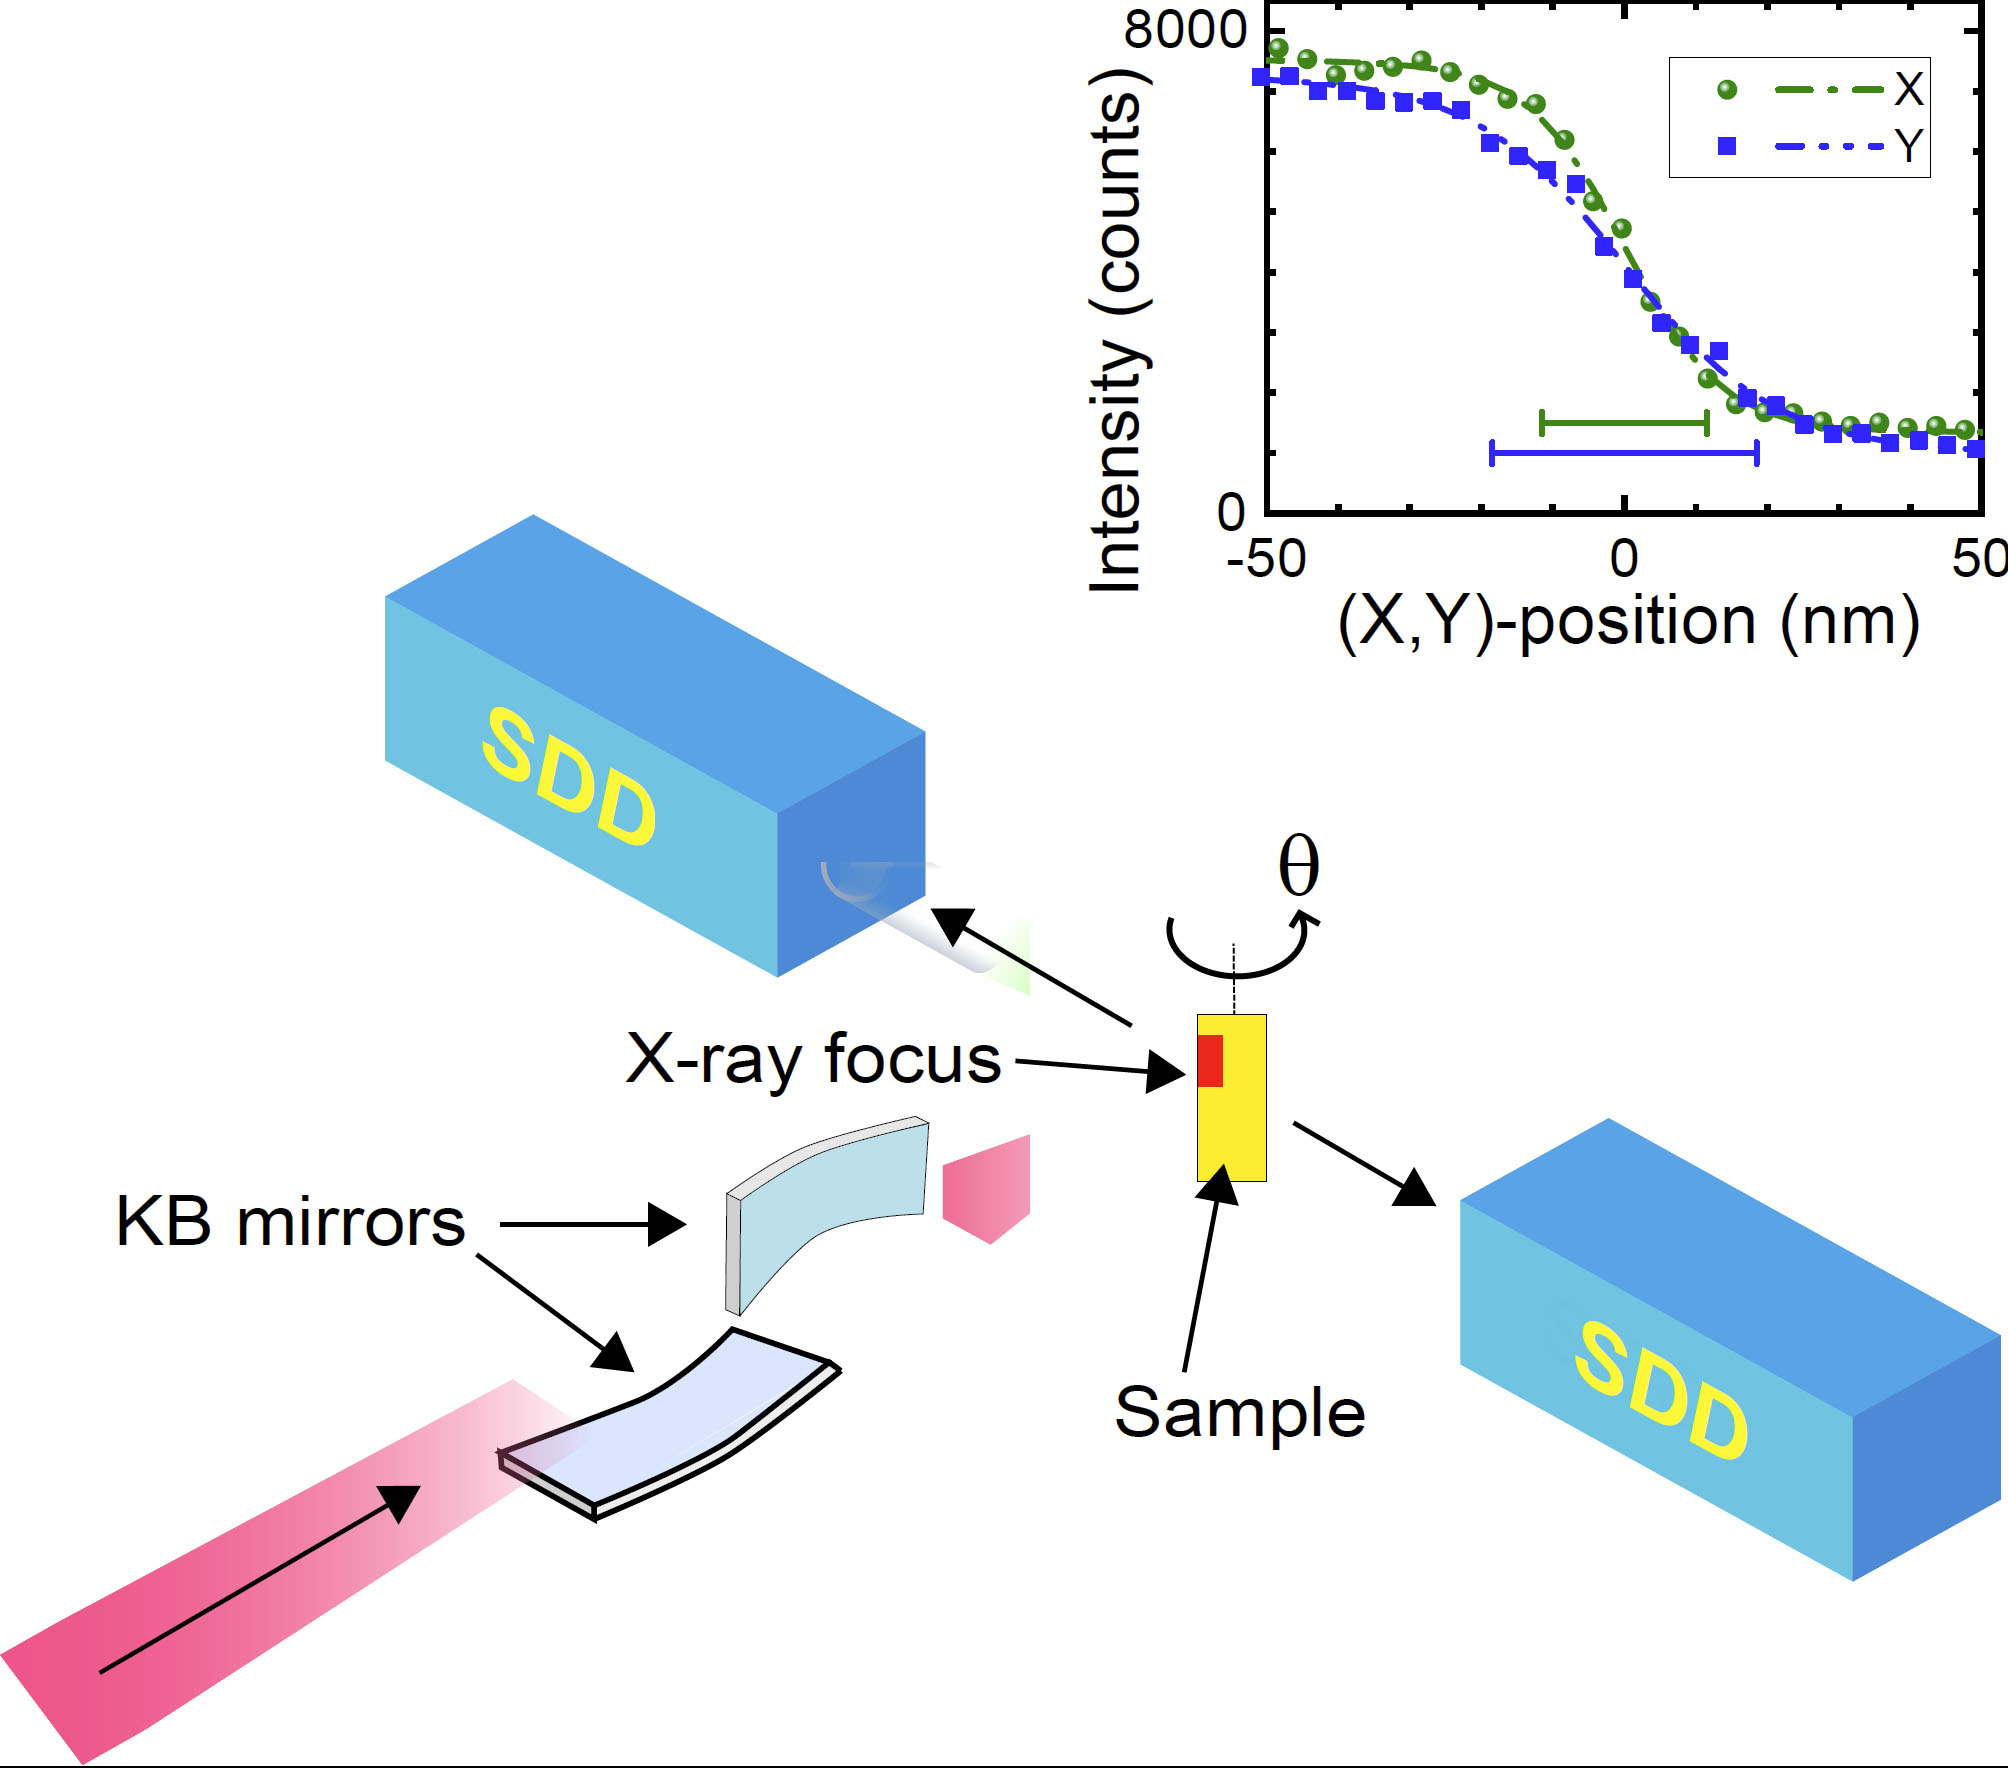 Schematic of the X-ray fluorescence imaging setup at ESRF beamline ID16A